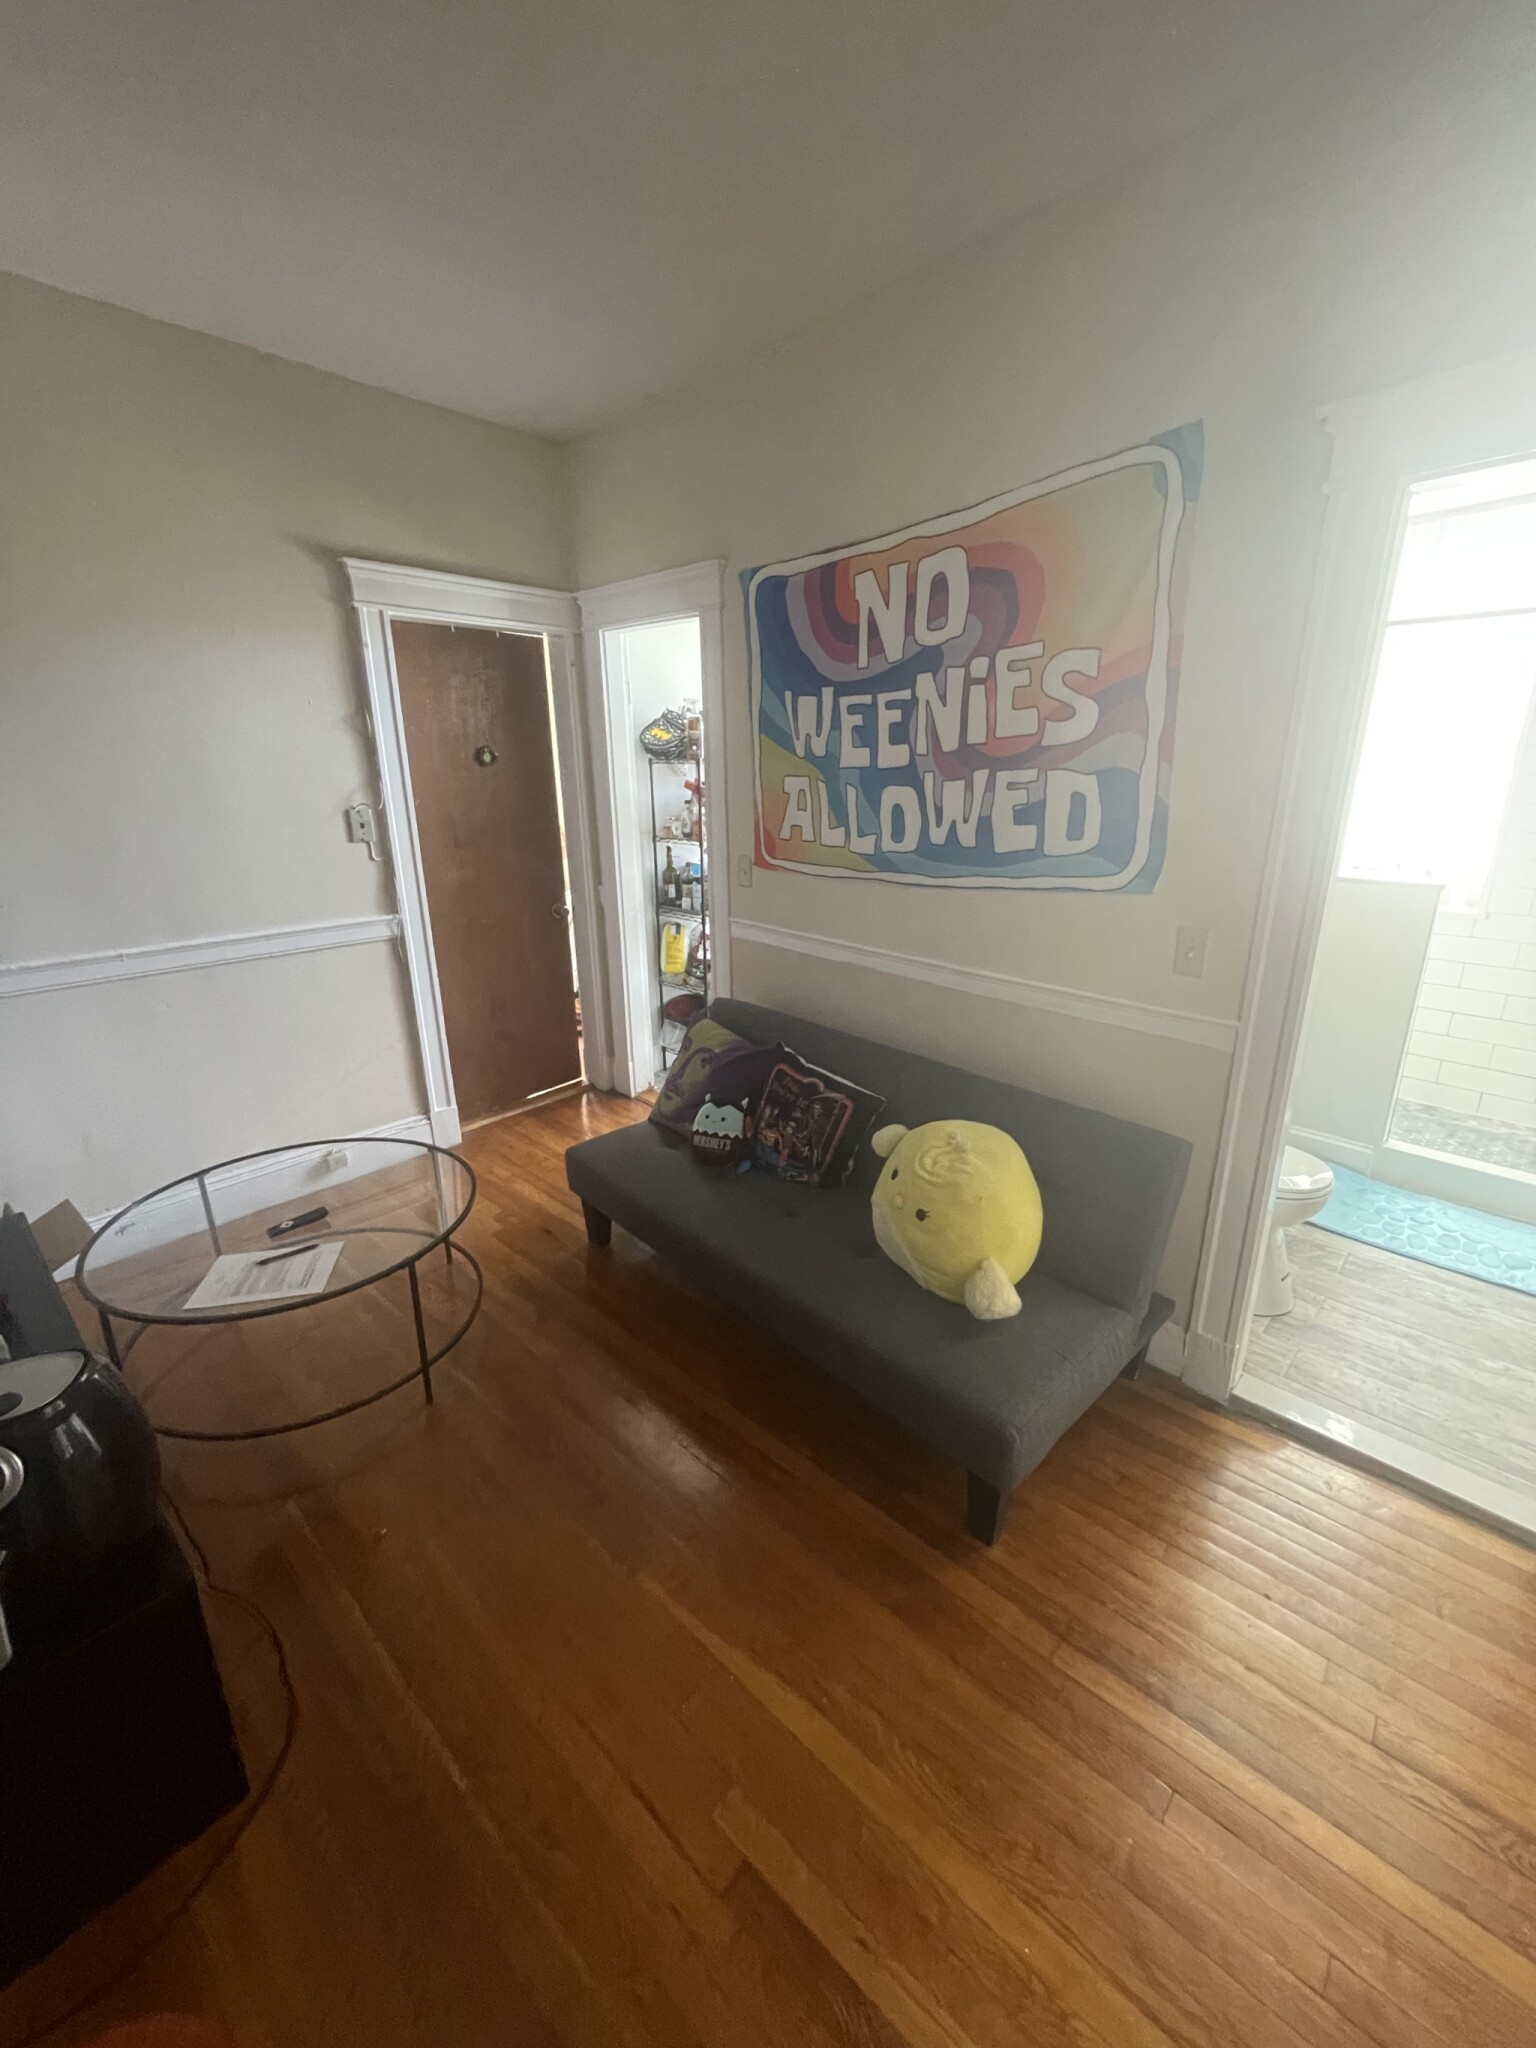 Photos of apartment on Chiswick Rd.,Boston MA 02134